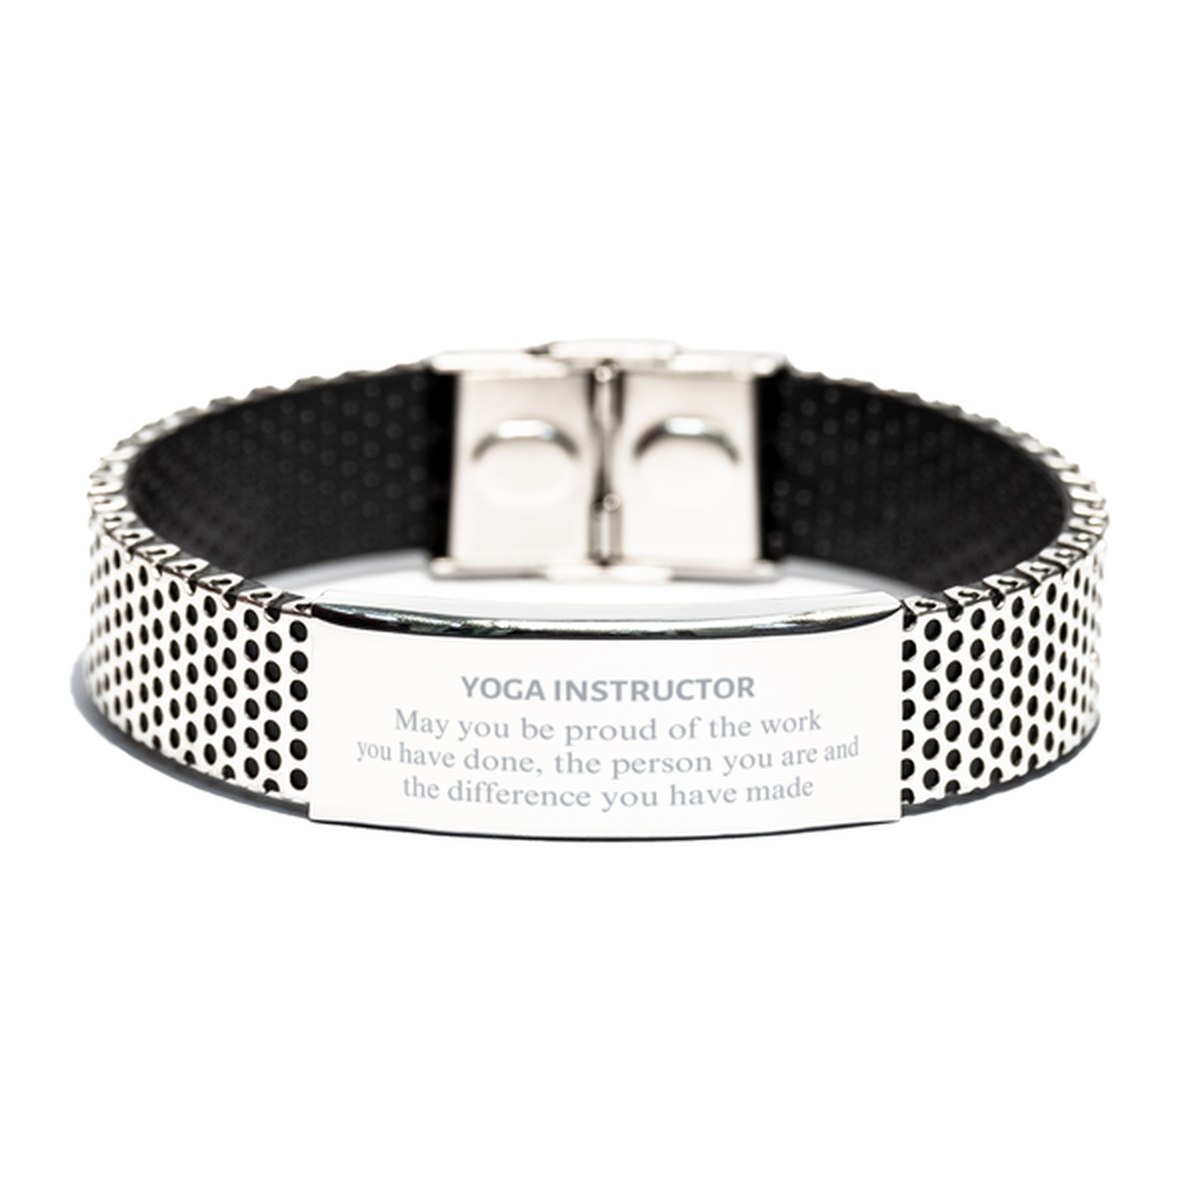 Yoga Instructor May you be proud of the work you have done, Retirement Yoga Instructor Stainless Steel Bracelet for Colleague Appreciation Gifts Amazing for Yoga Instructor